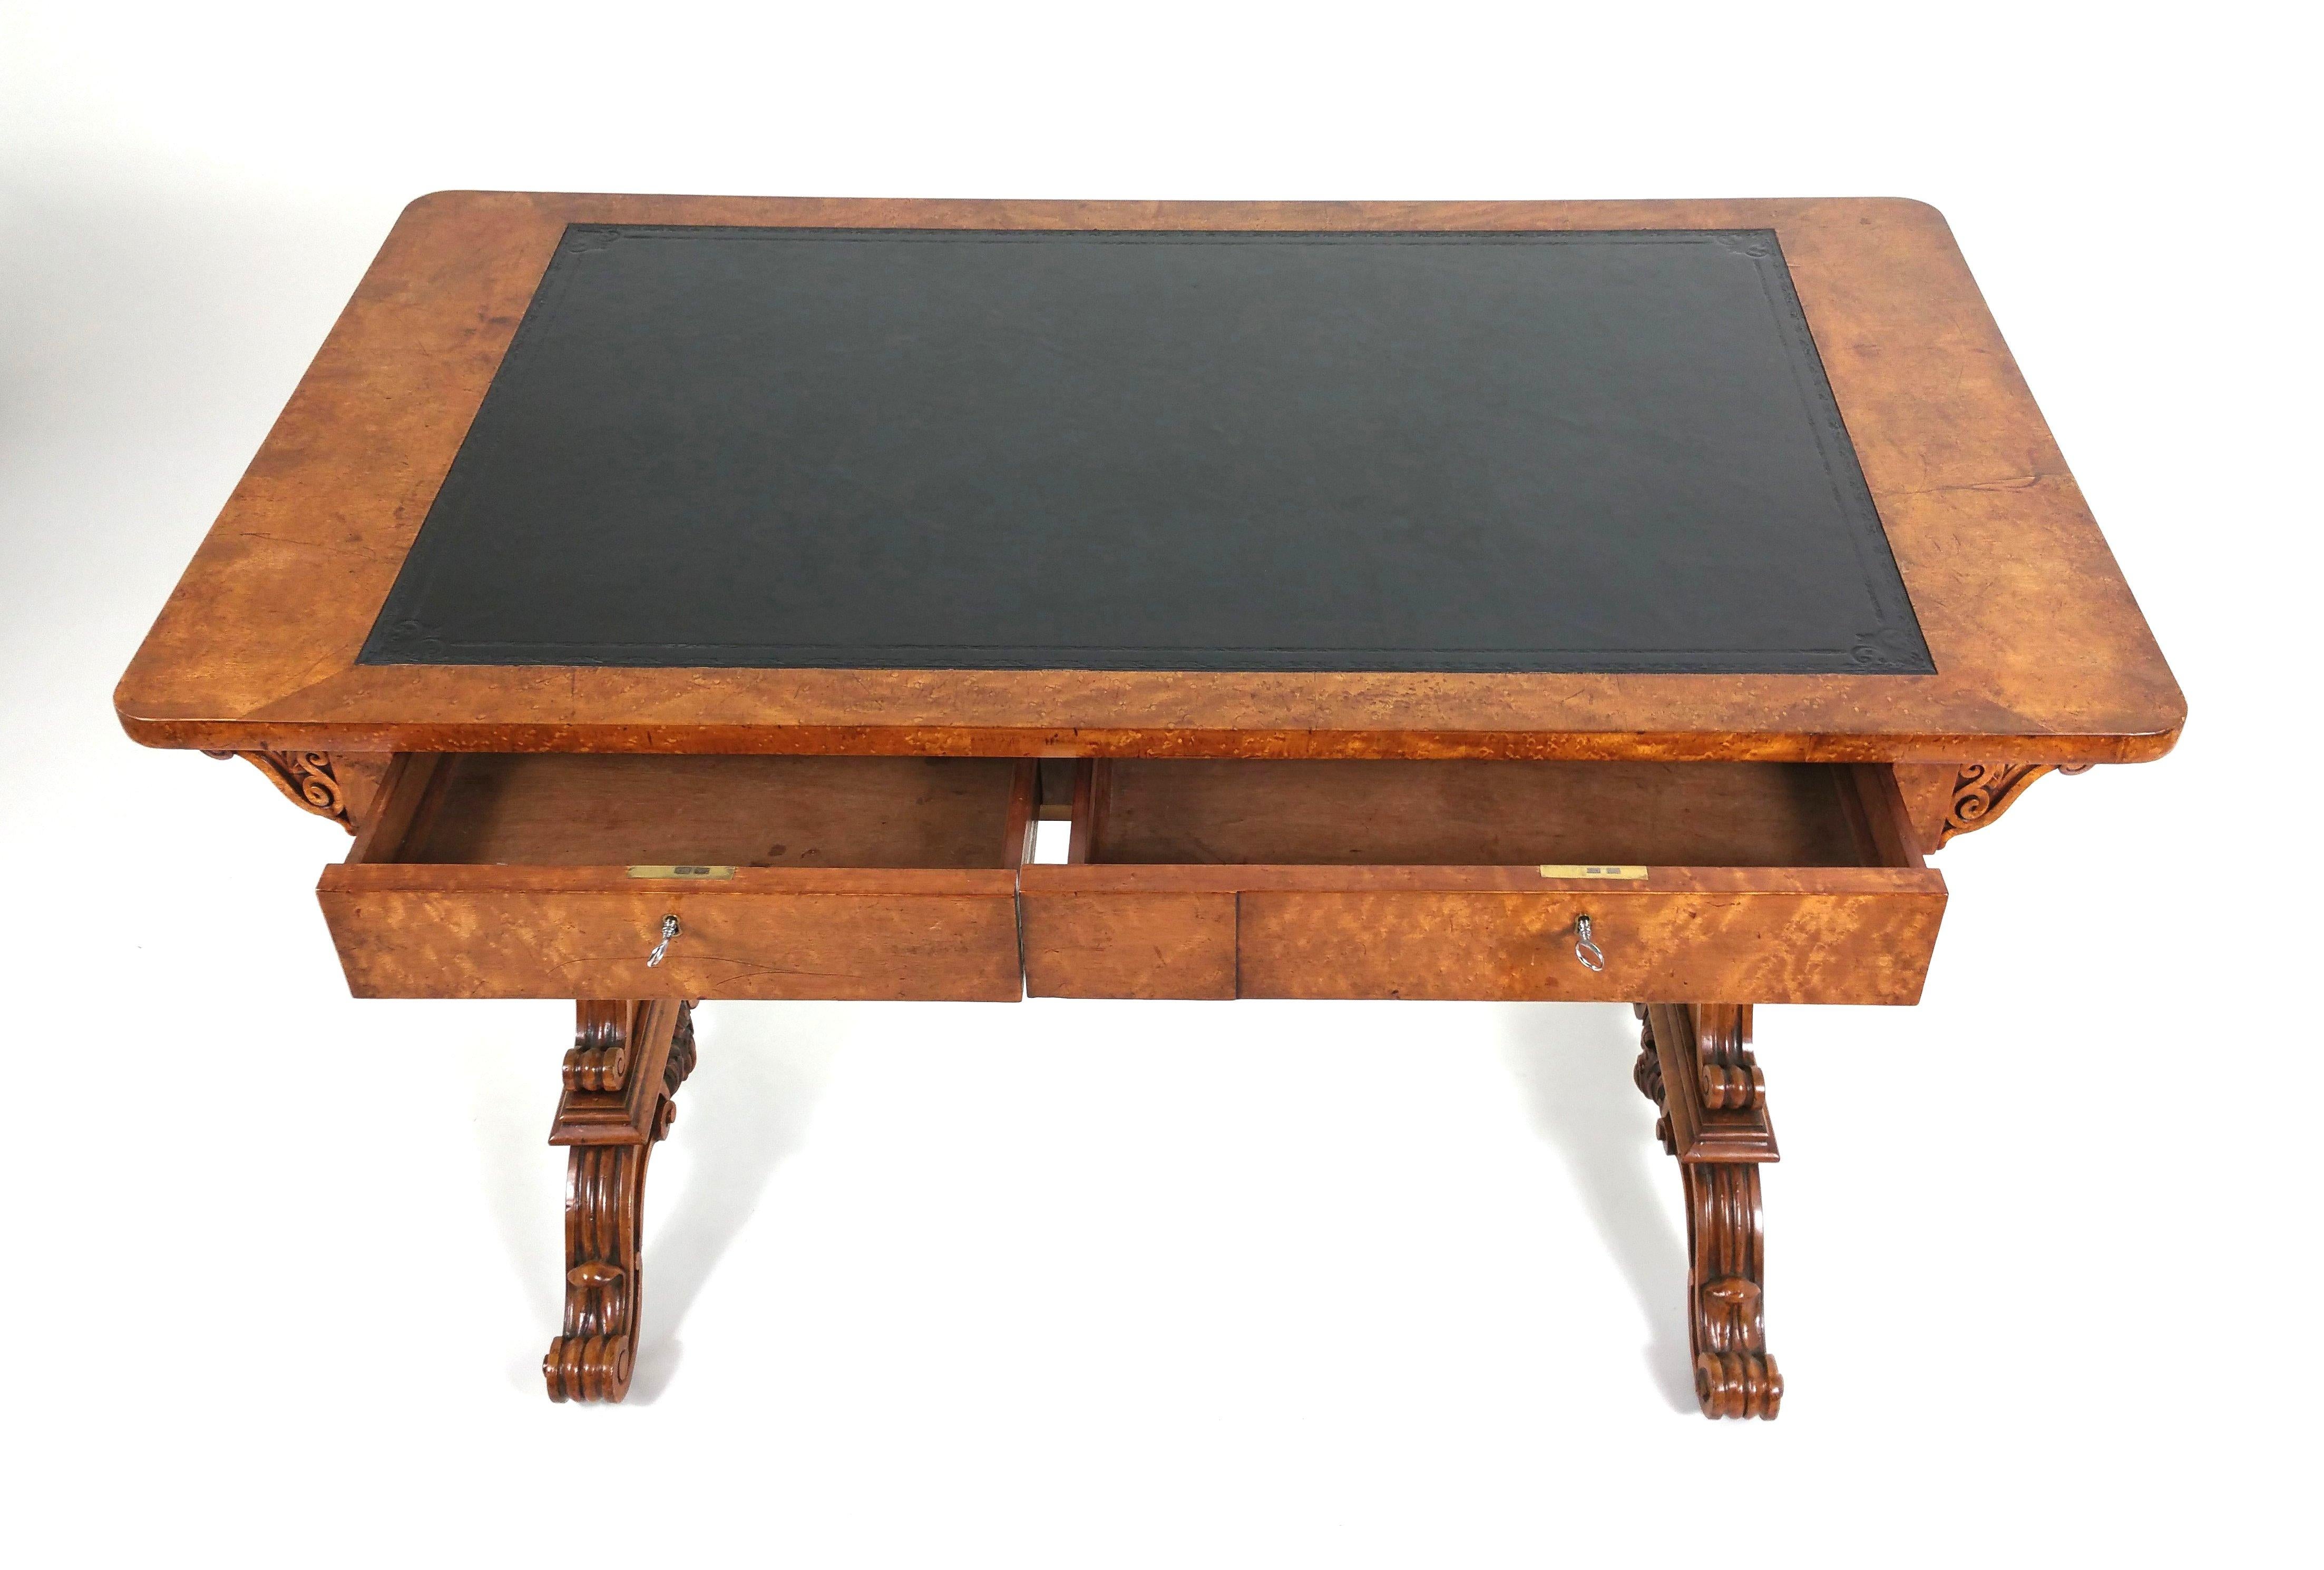 Early 19th Century Satin Birch 2-Drawer Library Table In Good Condition In London, west Sussex